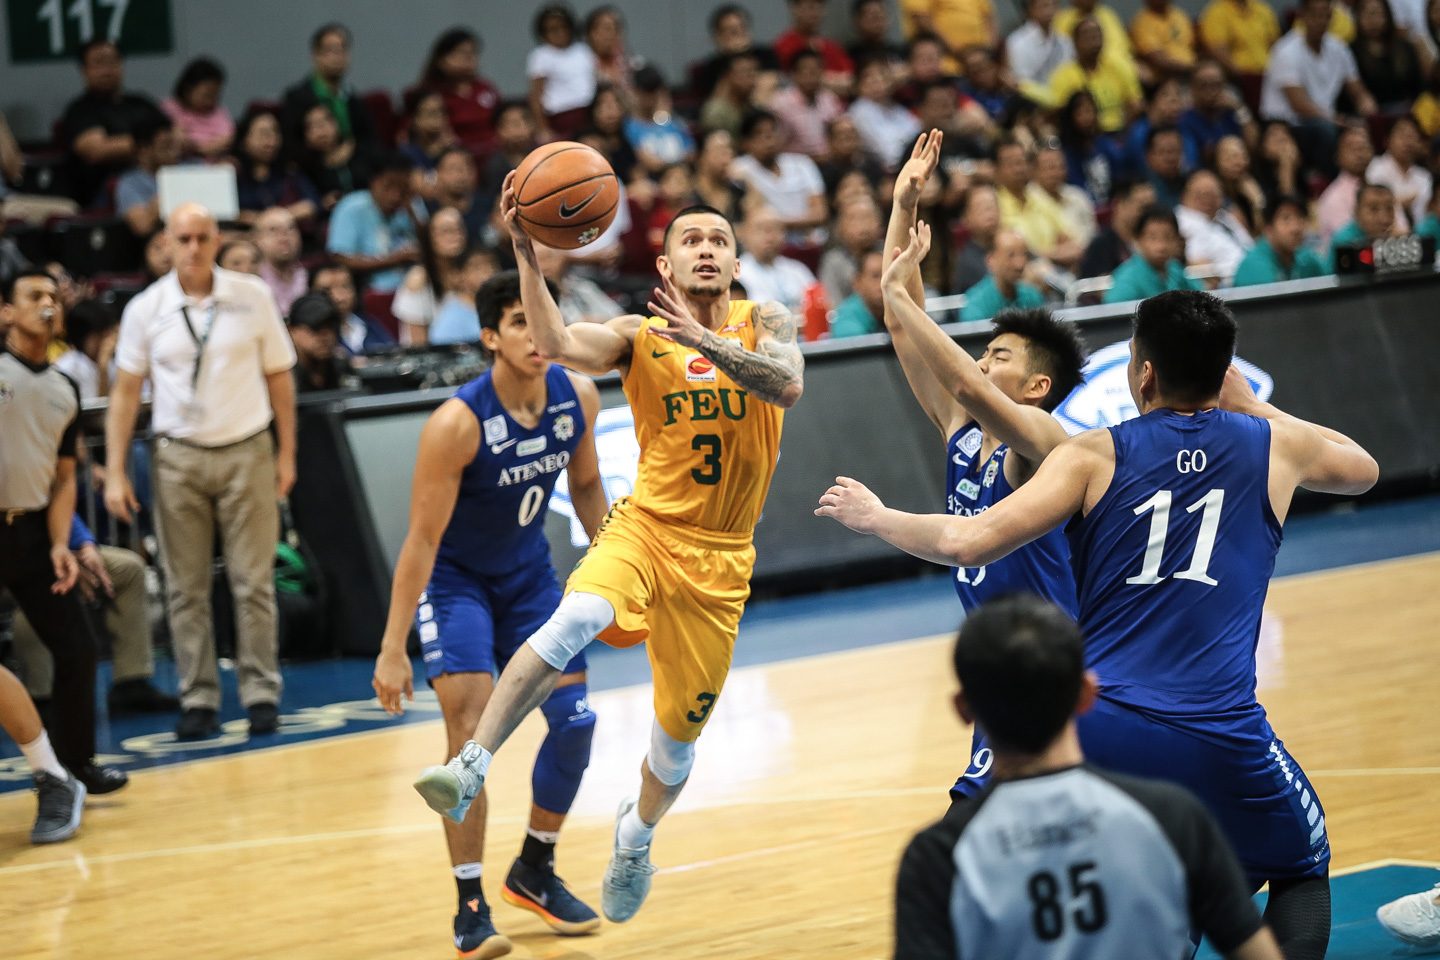 THE FUTURE. Only in his first playing year, FEU's star point guard Jasper Parker led the Tamaraws with 19 points, 4 rebounds, 2 assists and 2 steals. Photo by Josh Albelda/Rappler   